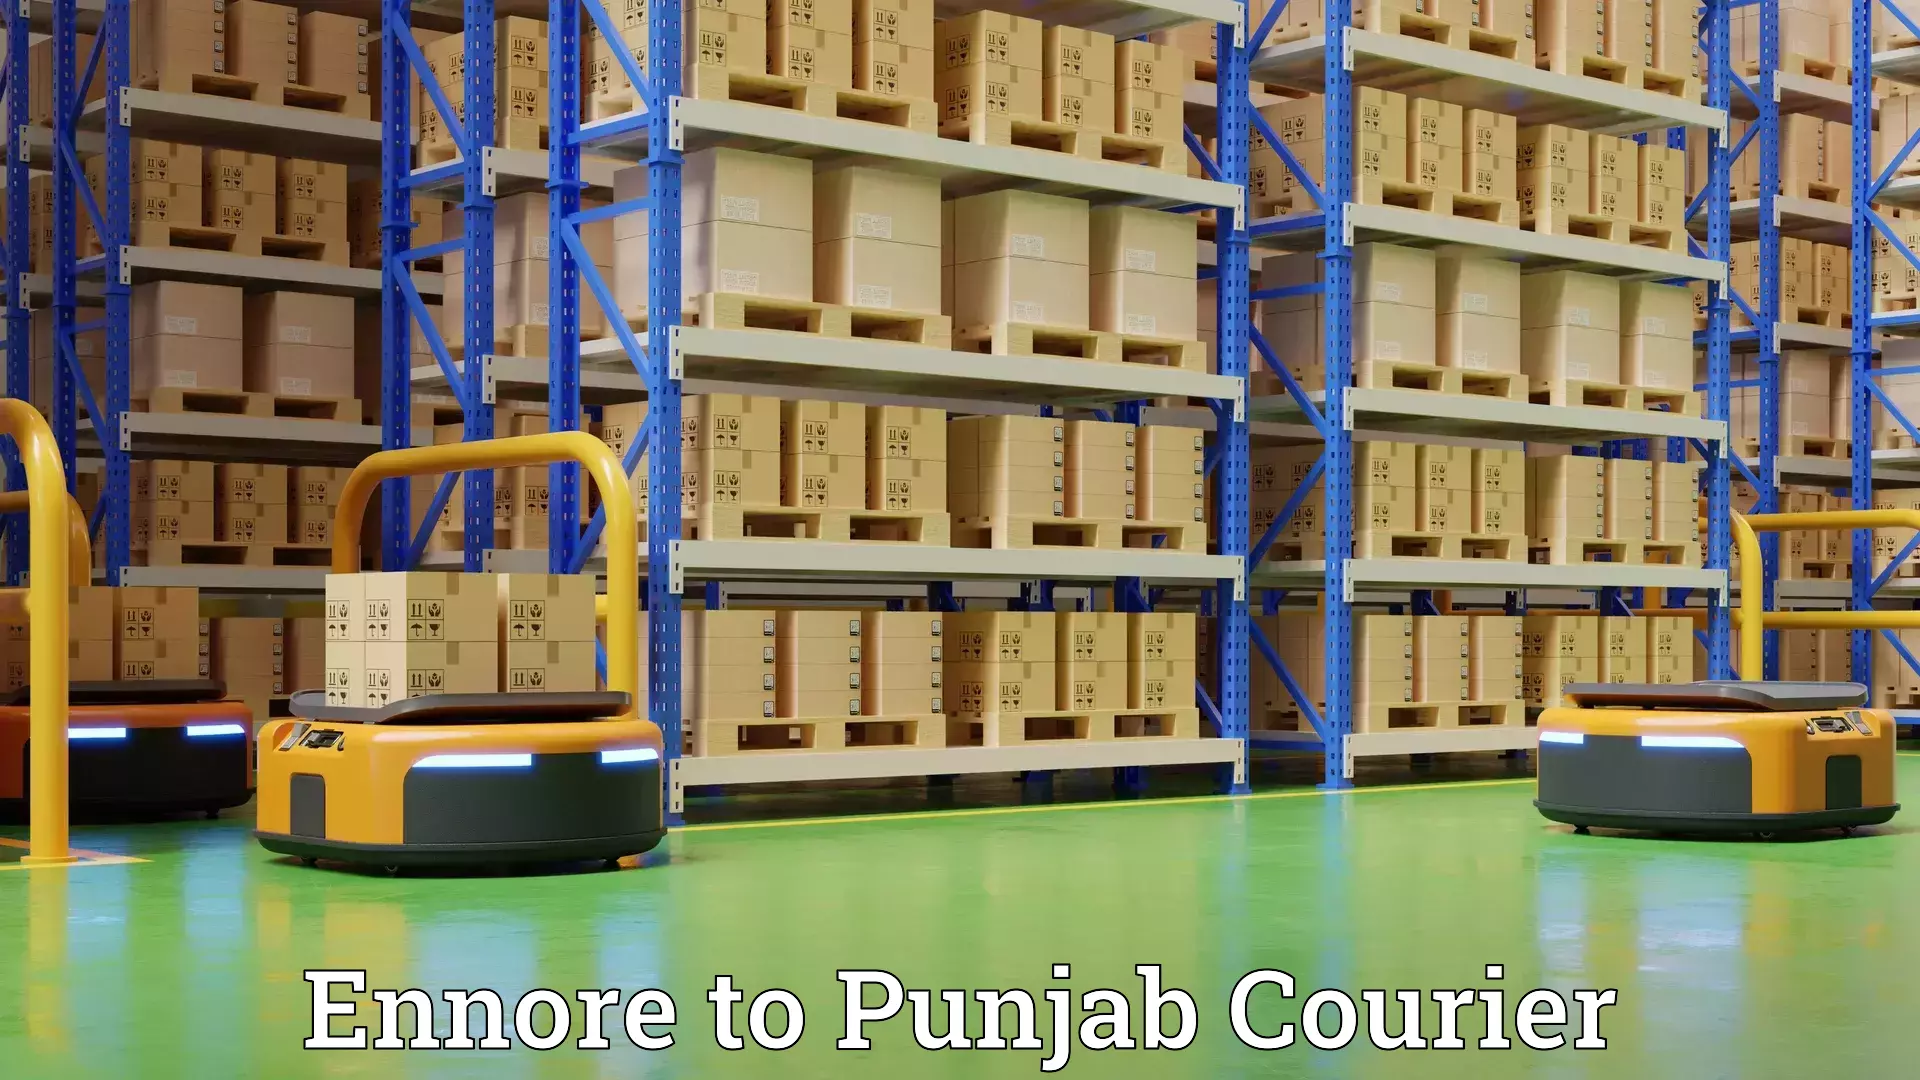 Furniture transport specialists Ennore to Punjab